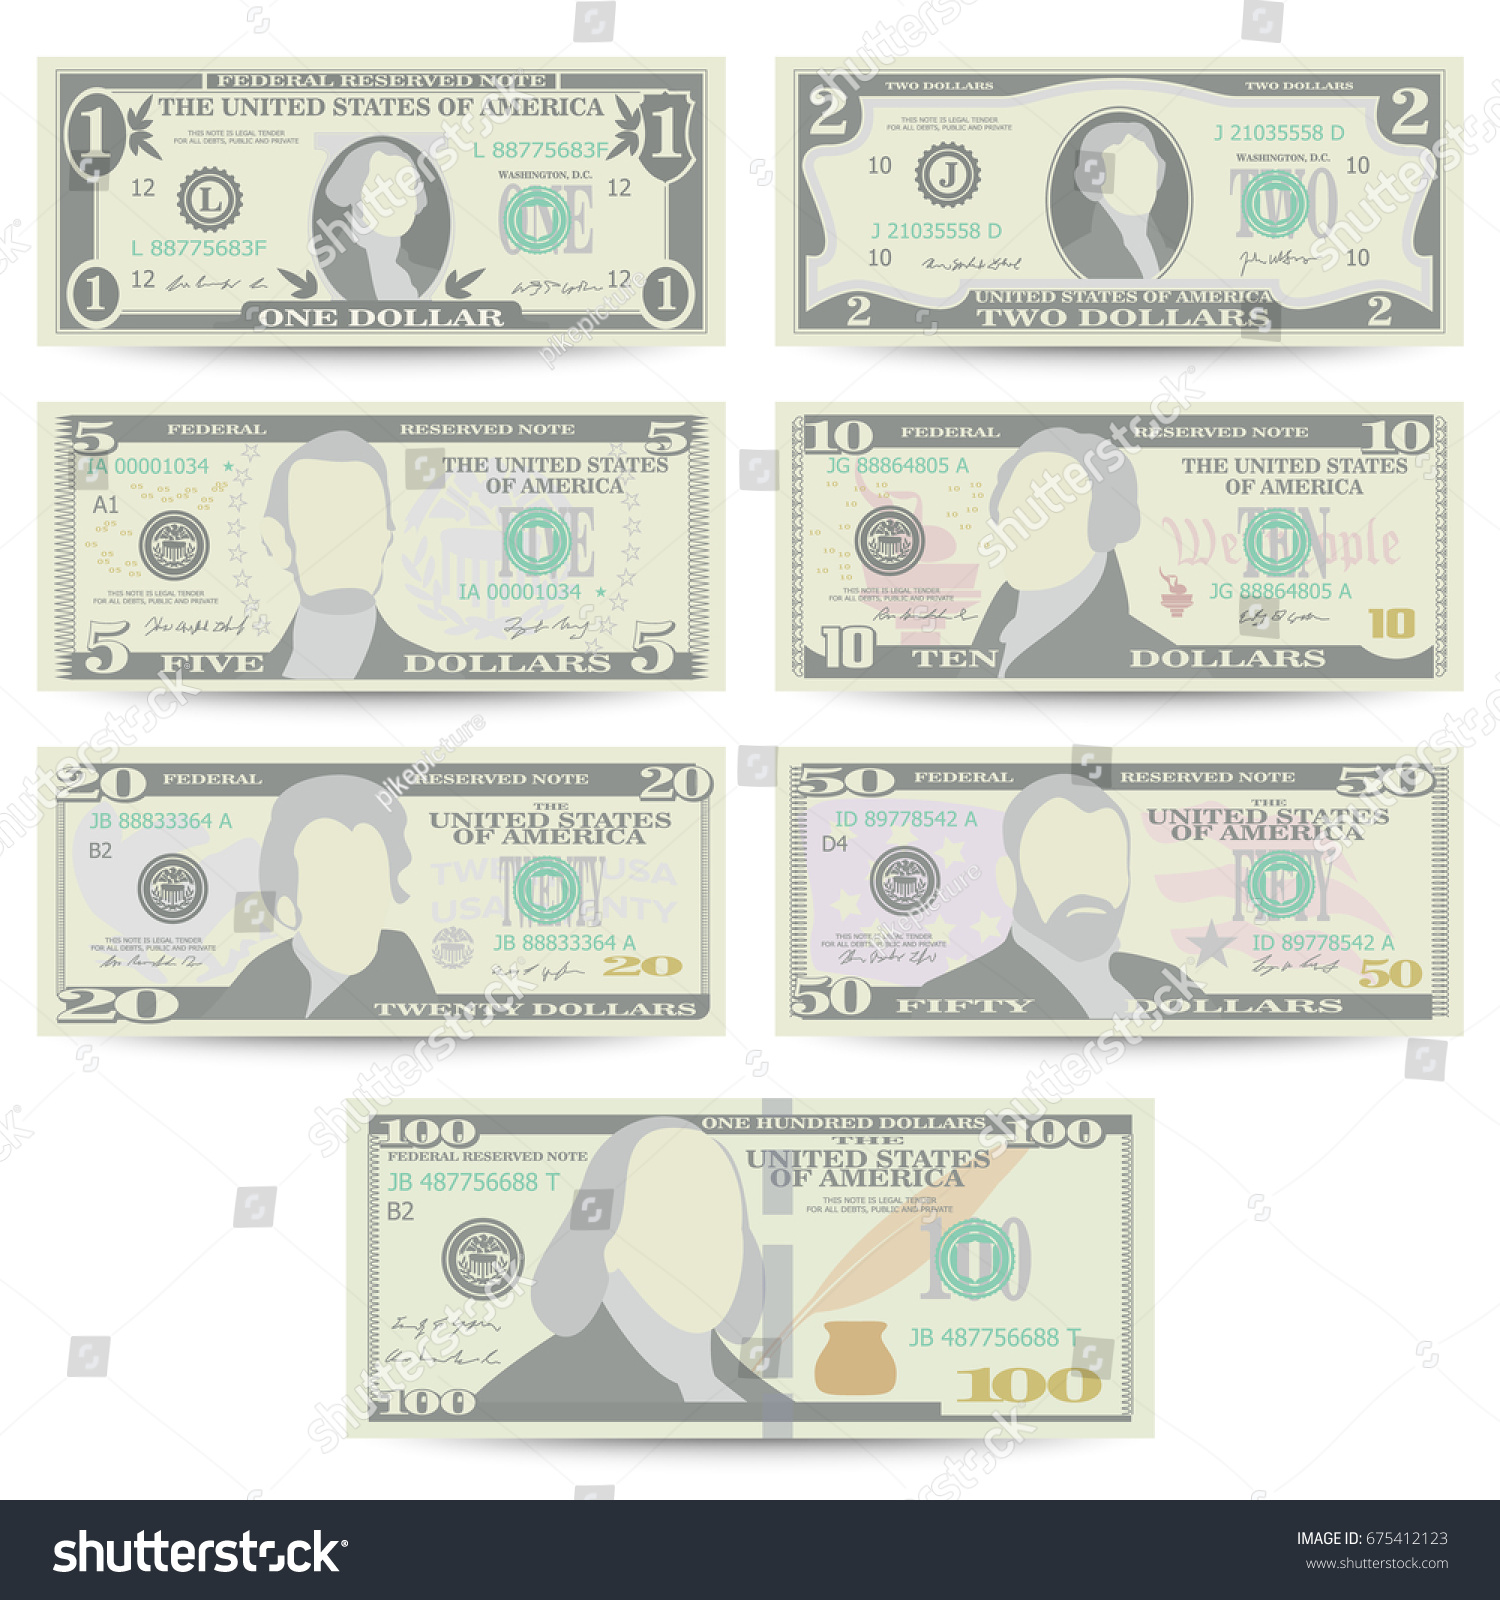 SVG of Dollars Banknote Set Vector. Cartoon US Currency Dollar. 10, 20 Front Side Of American Money Bill Isolated Illustration. Cash Dollar Symbol. Every Denomination Of US Currency Note.
 svg